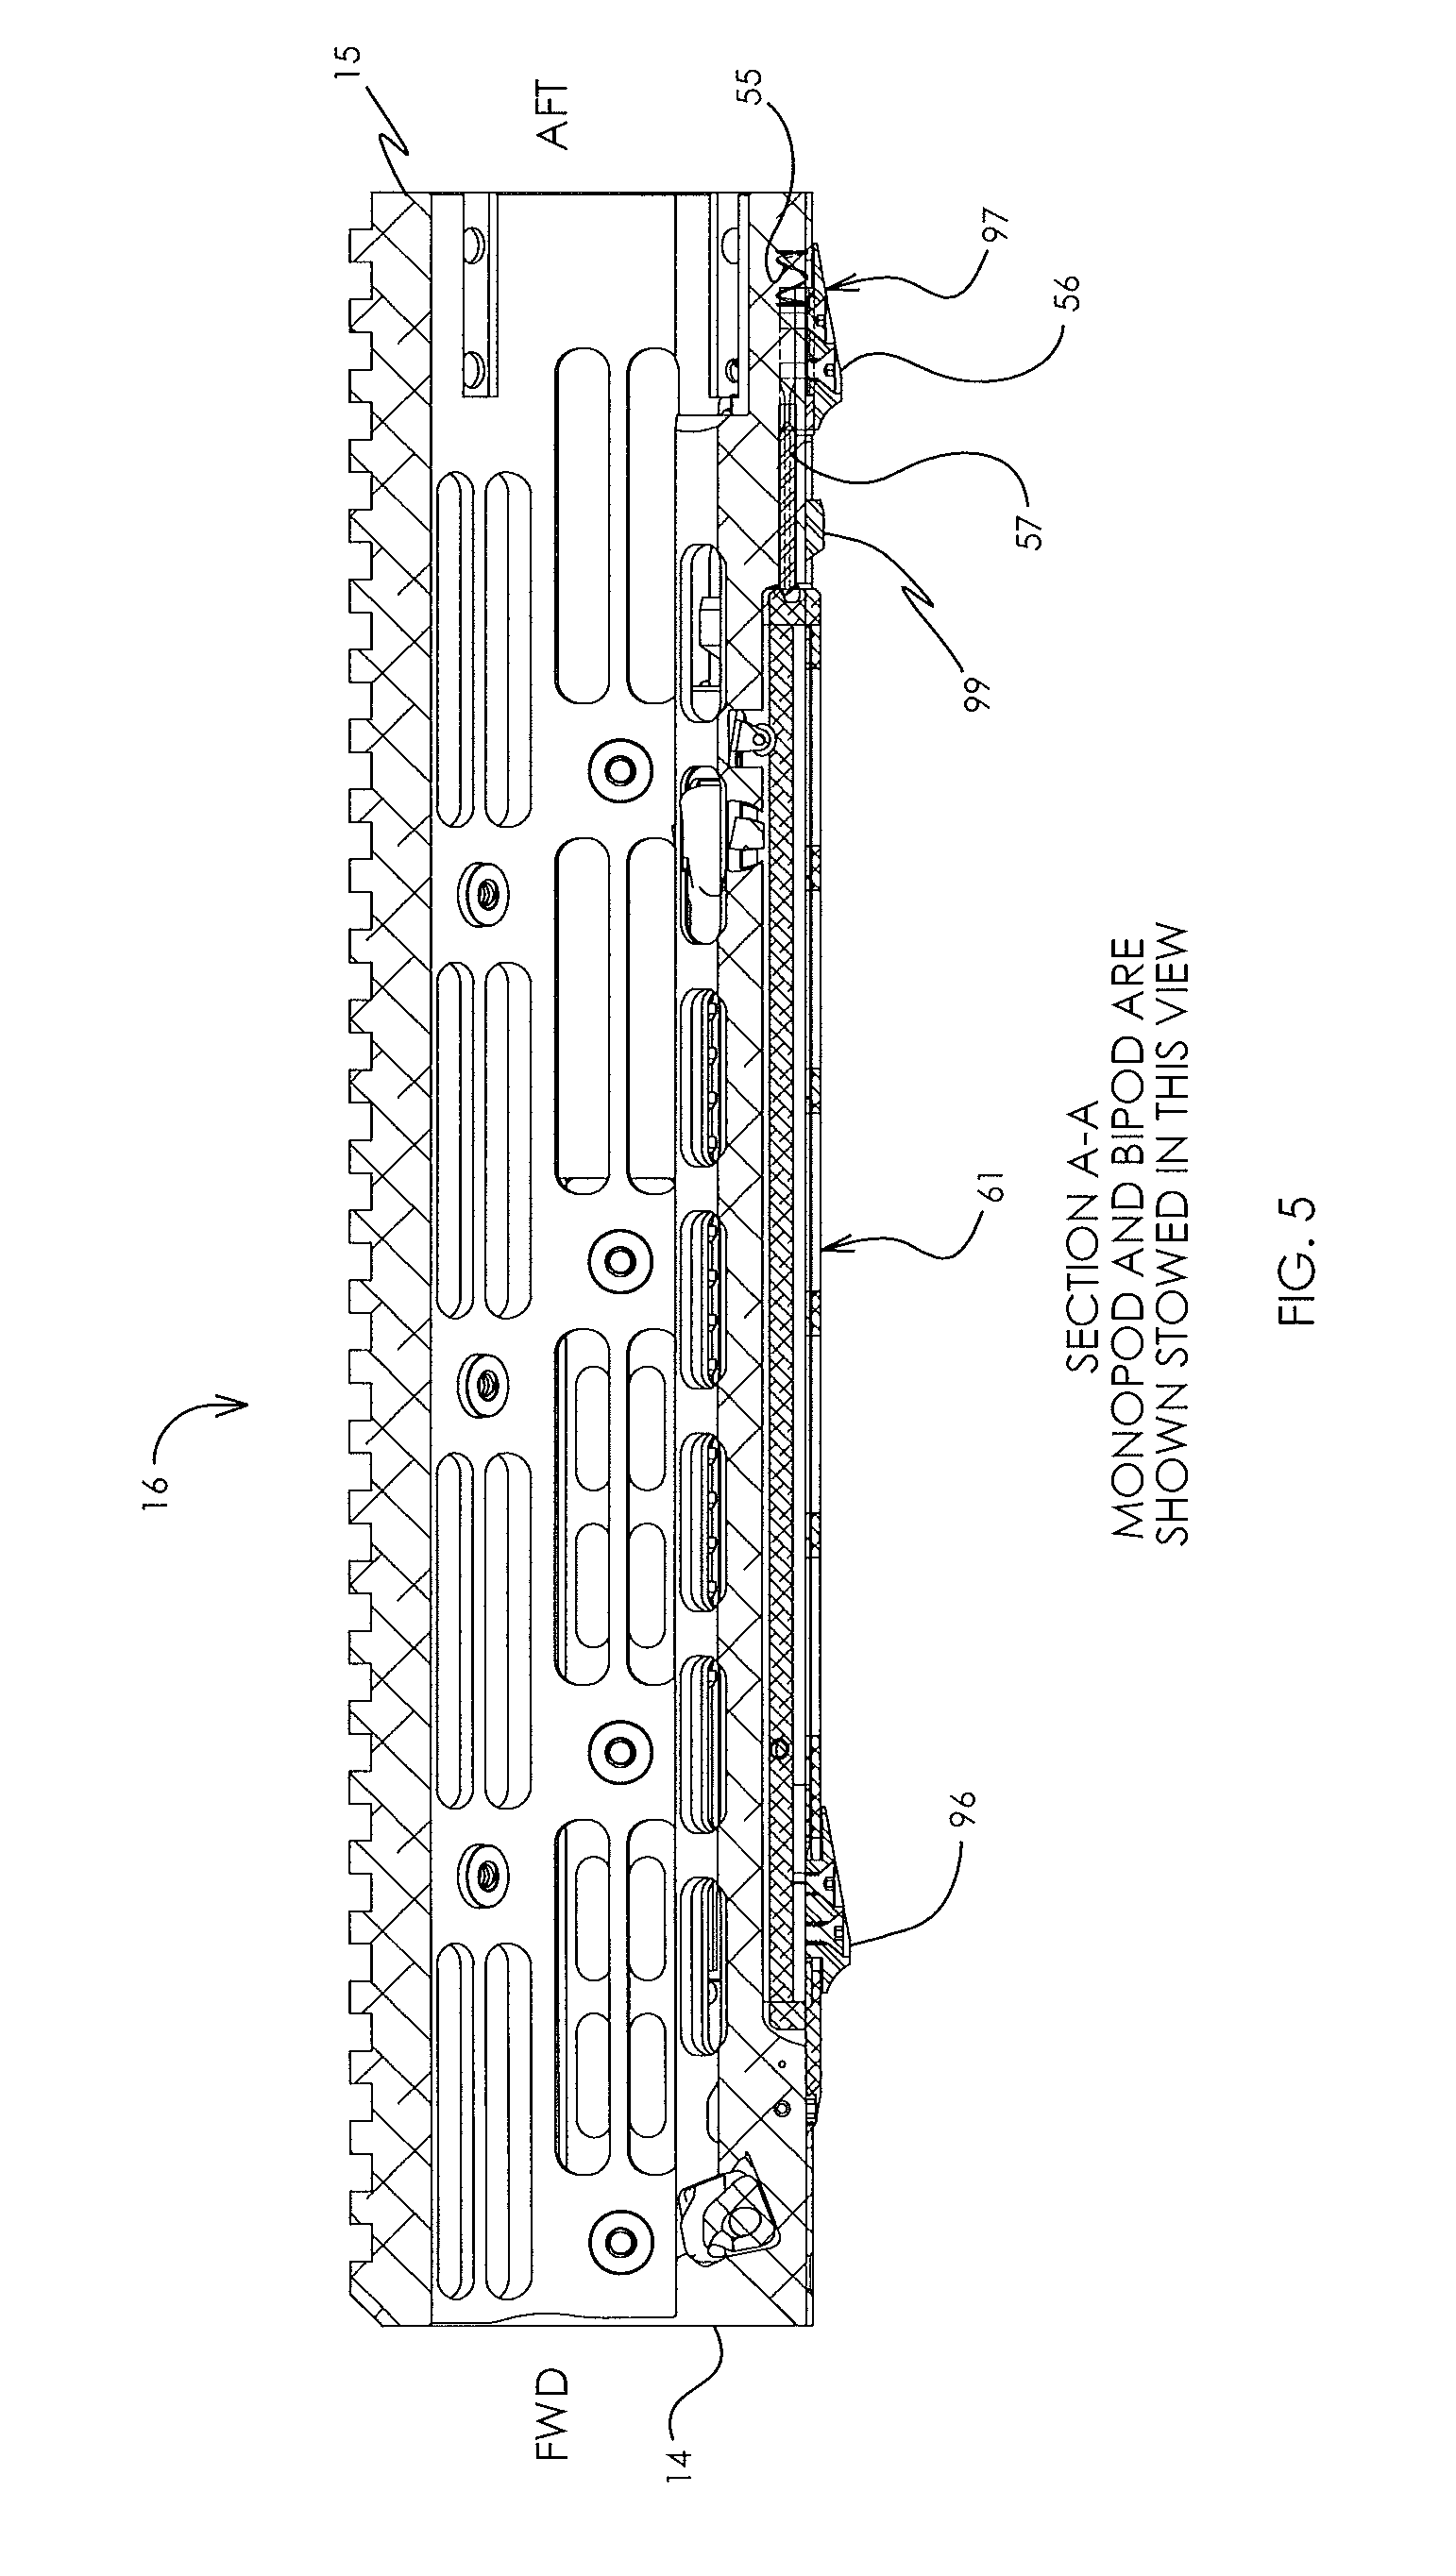 Handguard with integrated pod and firearm